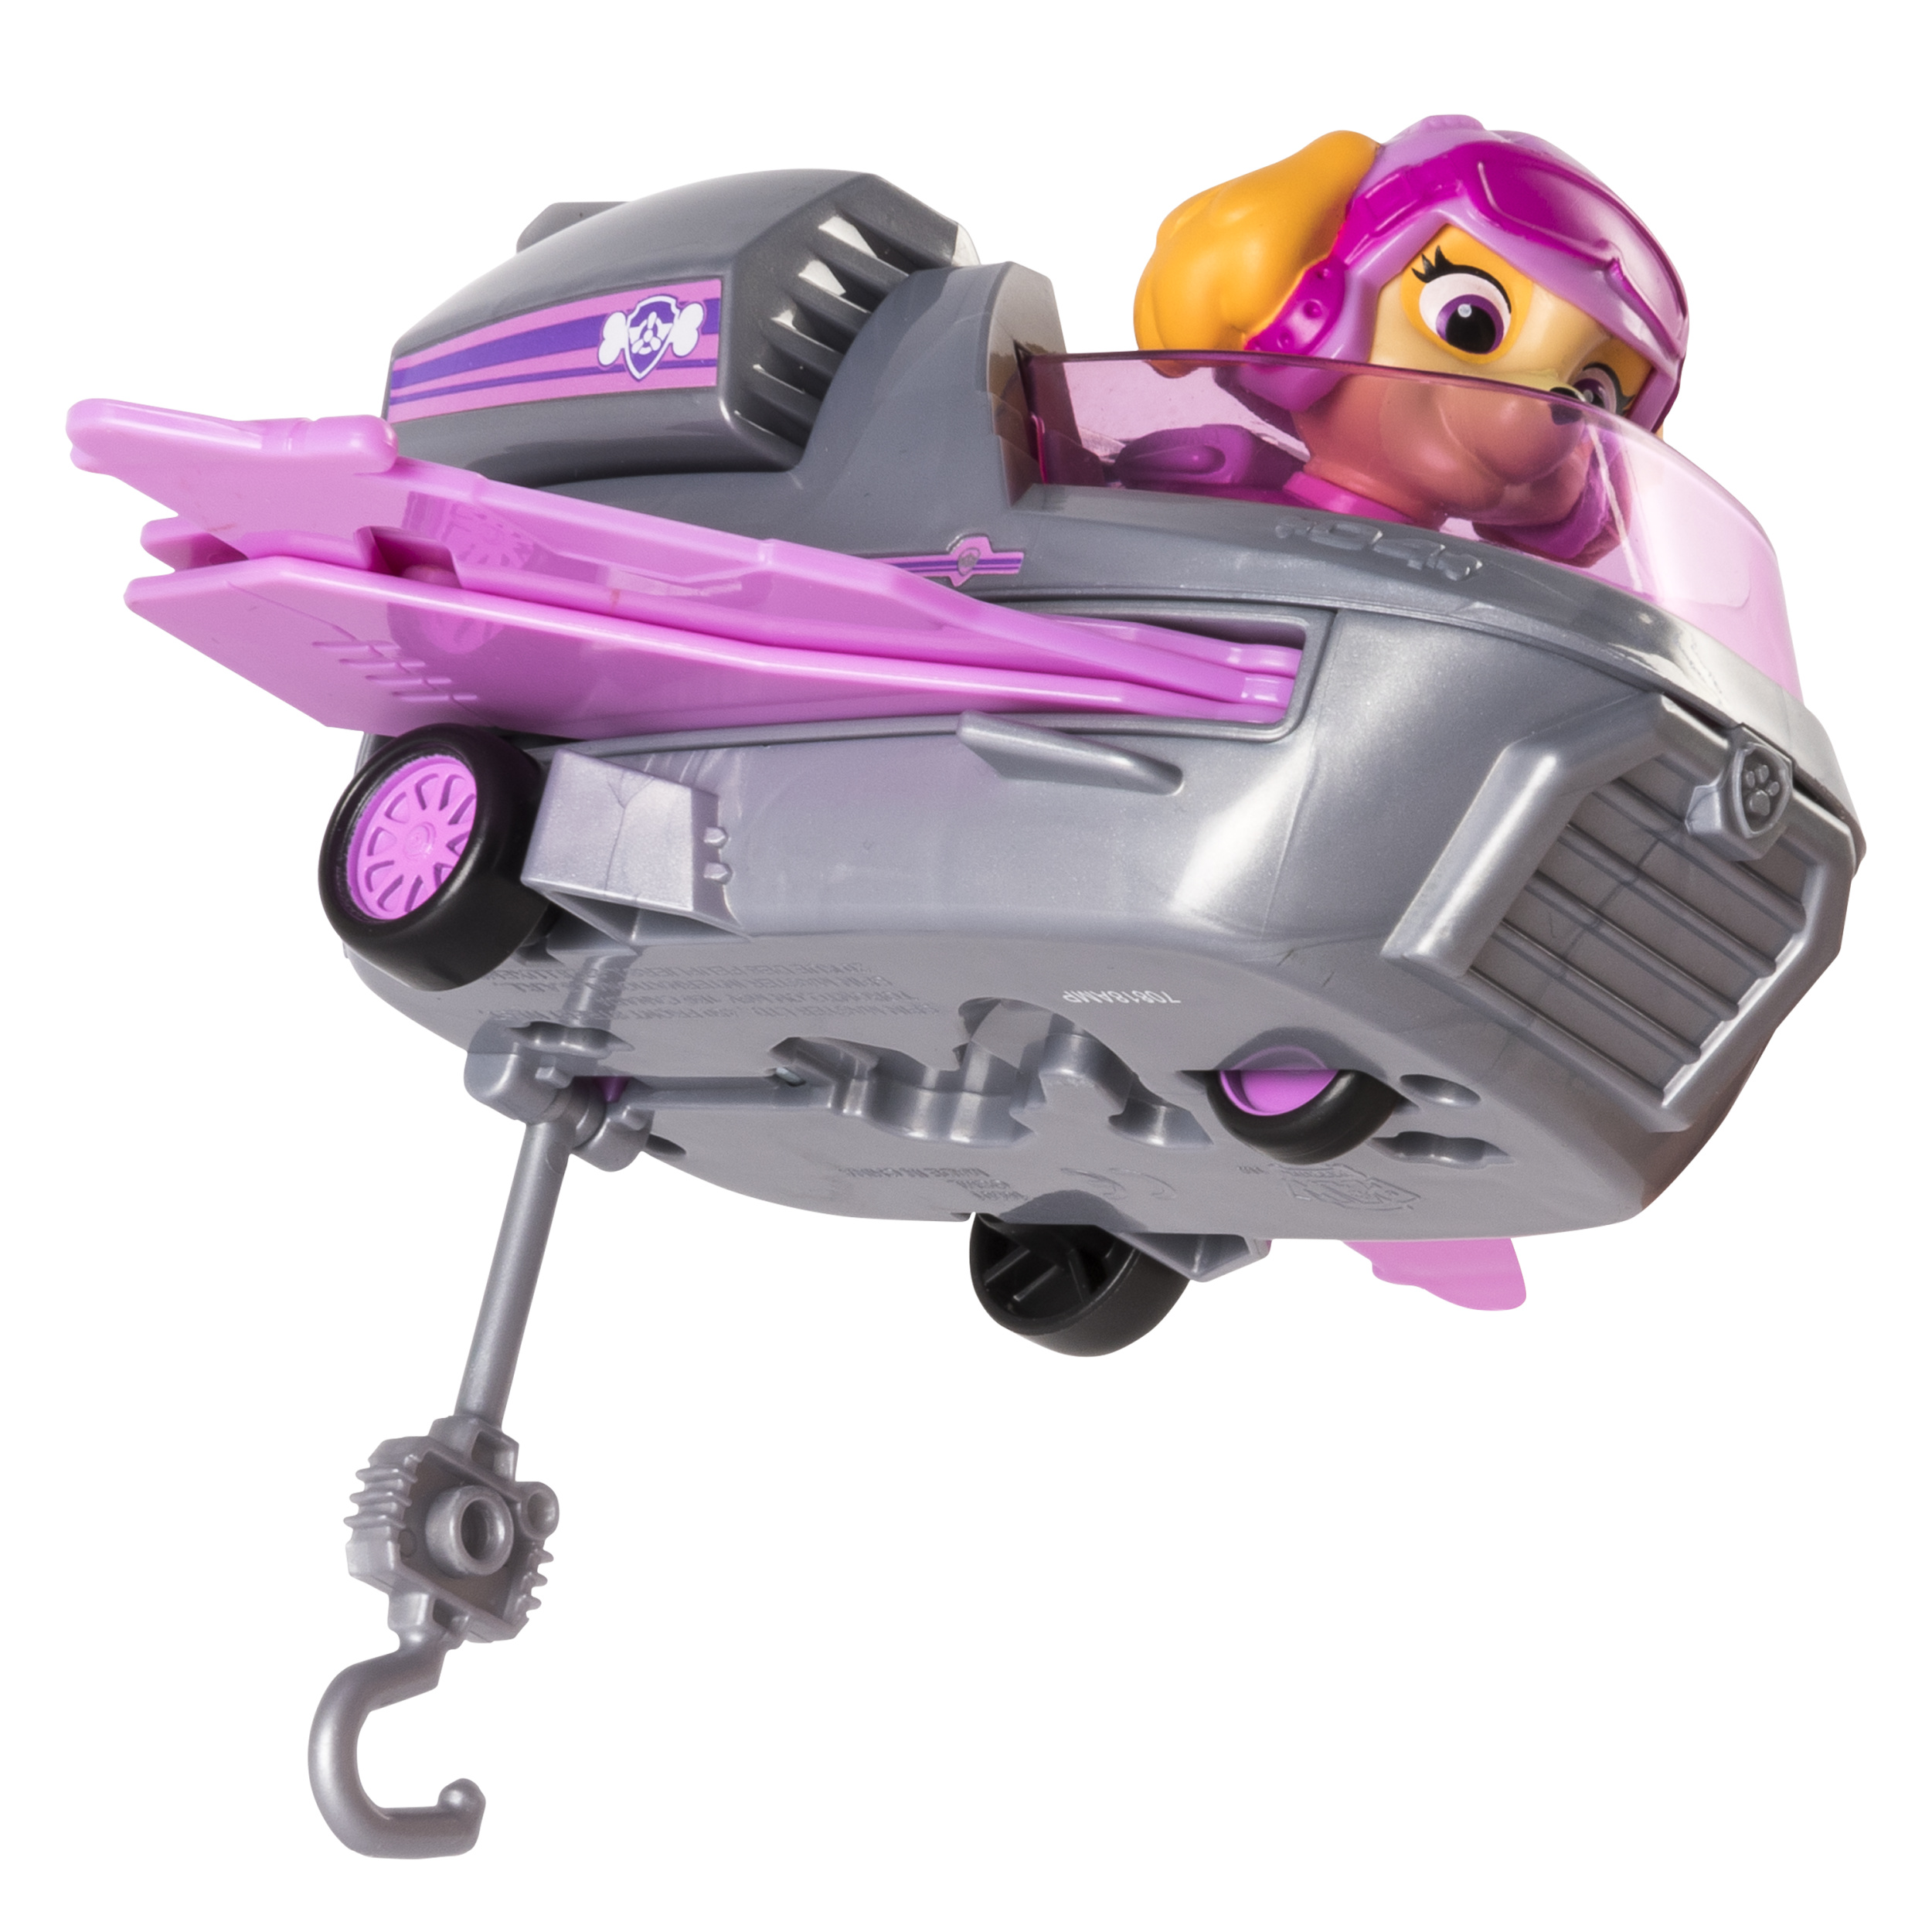 PAW Patrol Skye’s Rescue Jet with Extendable Wings Play Vehicle - image 3 of 5